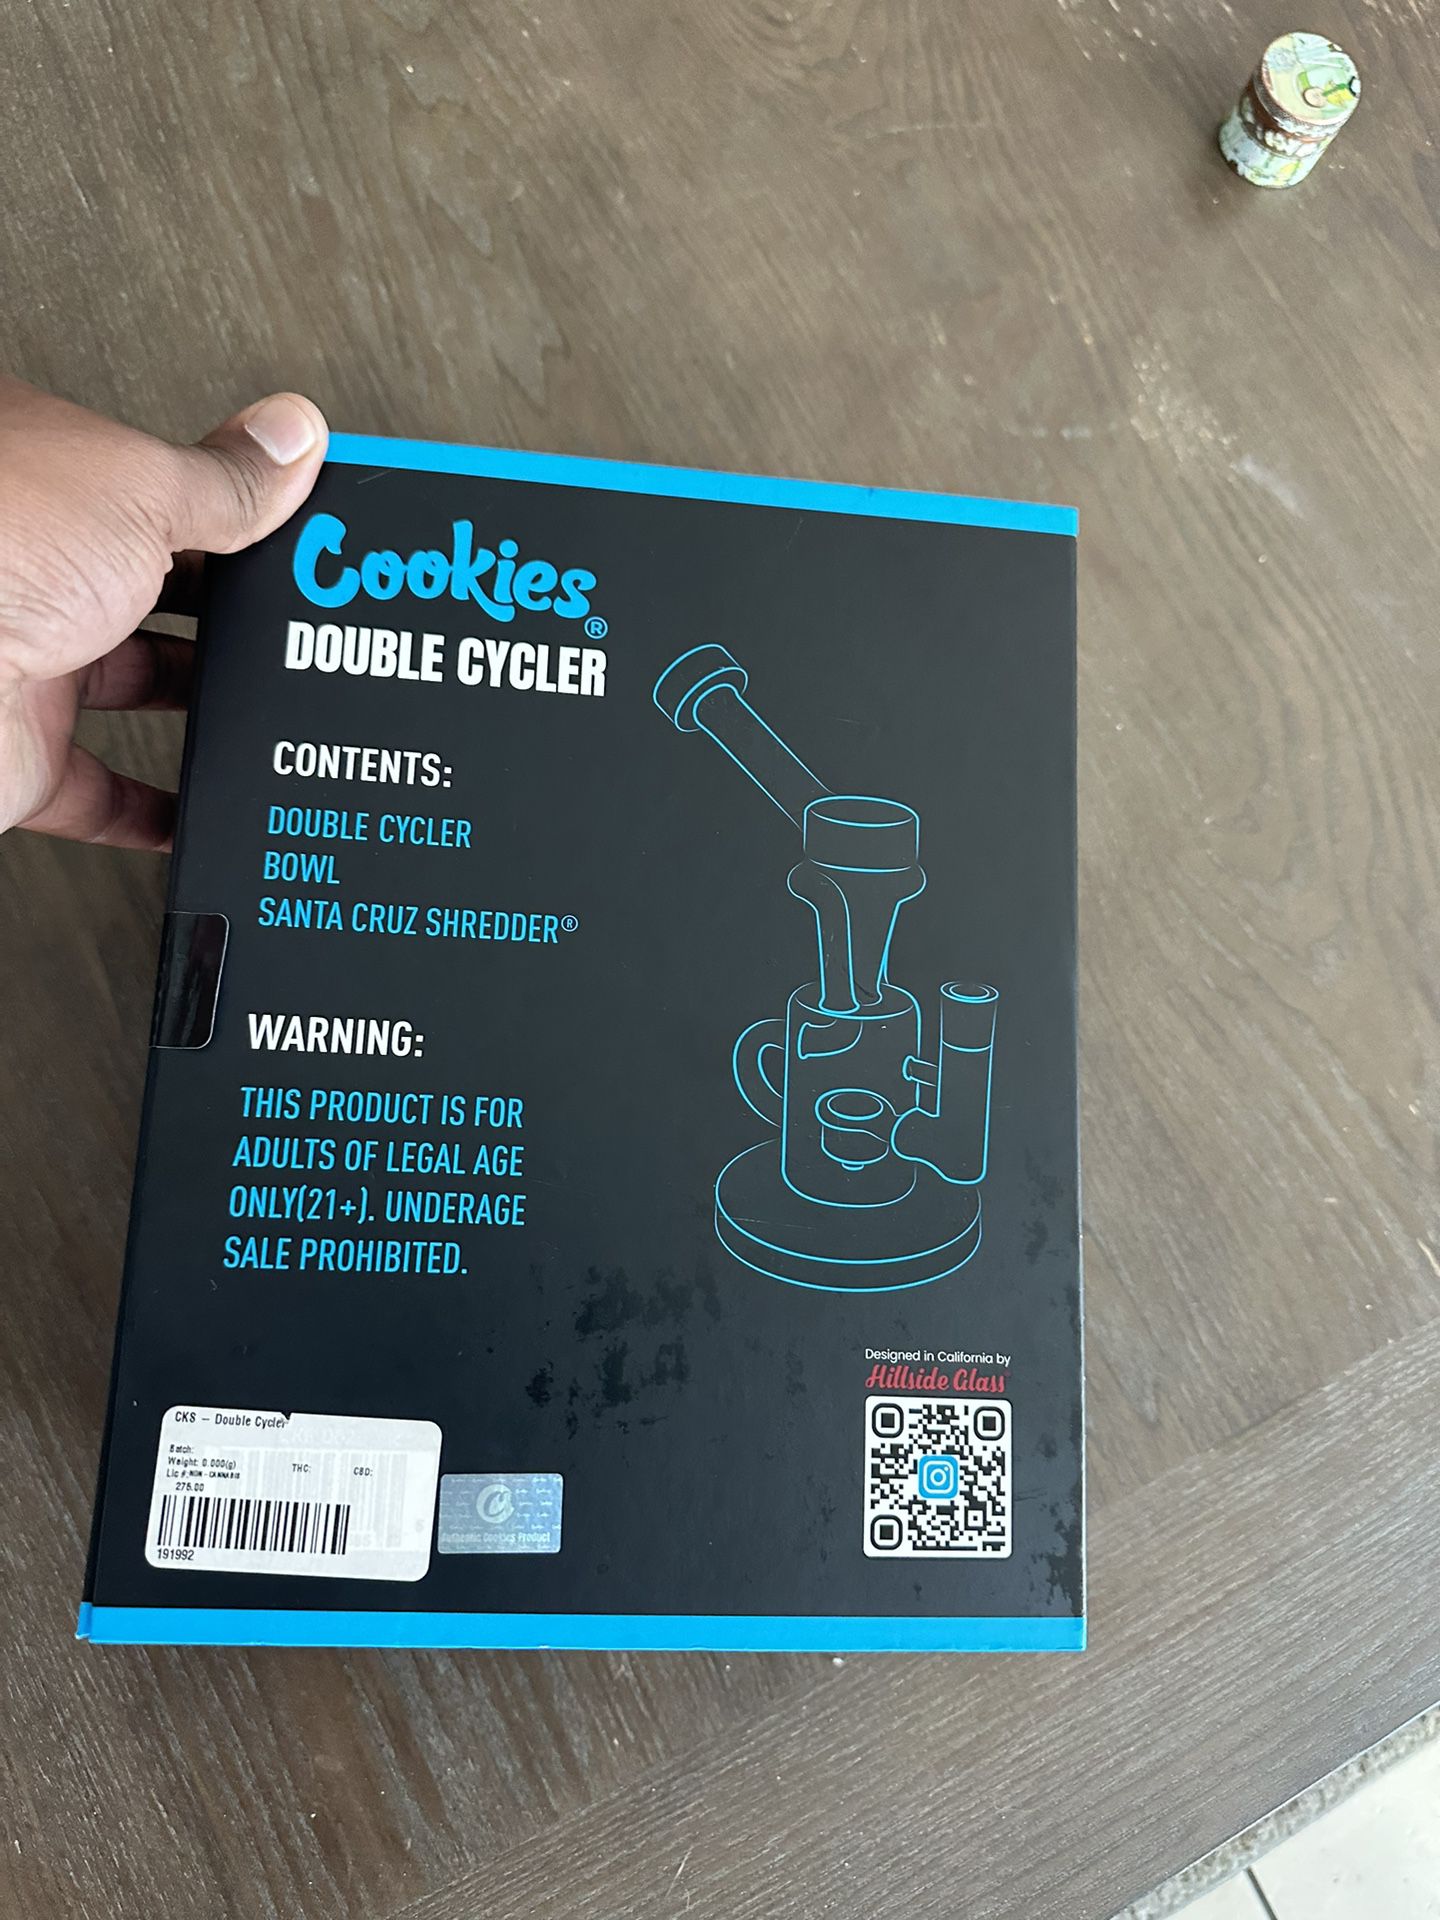 Cookies Double Cycle Rig